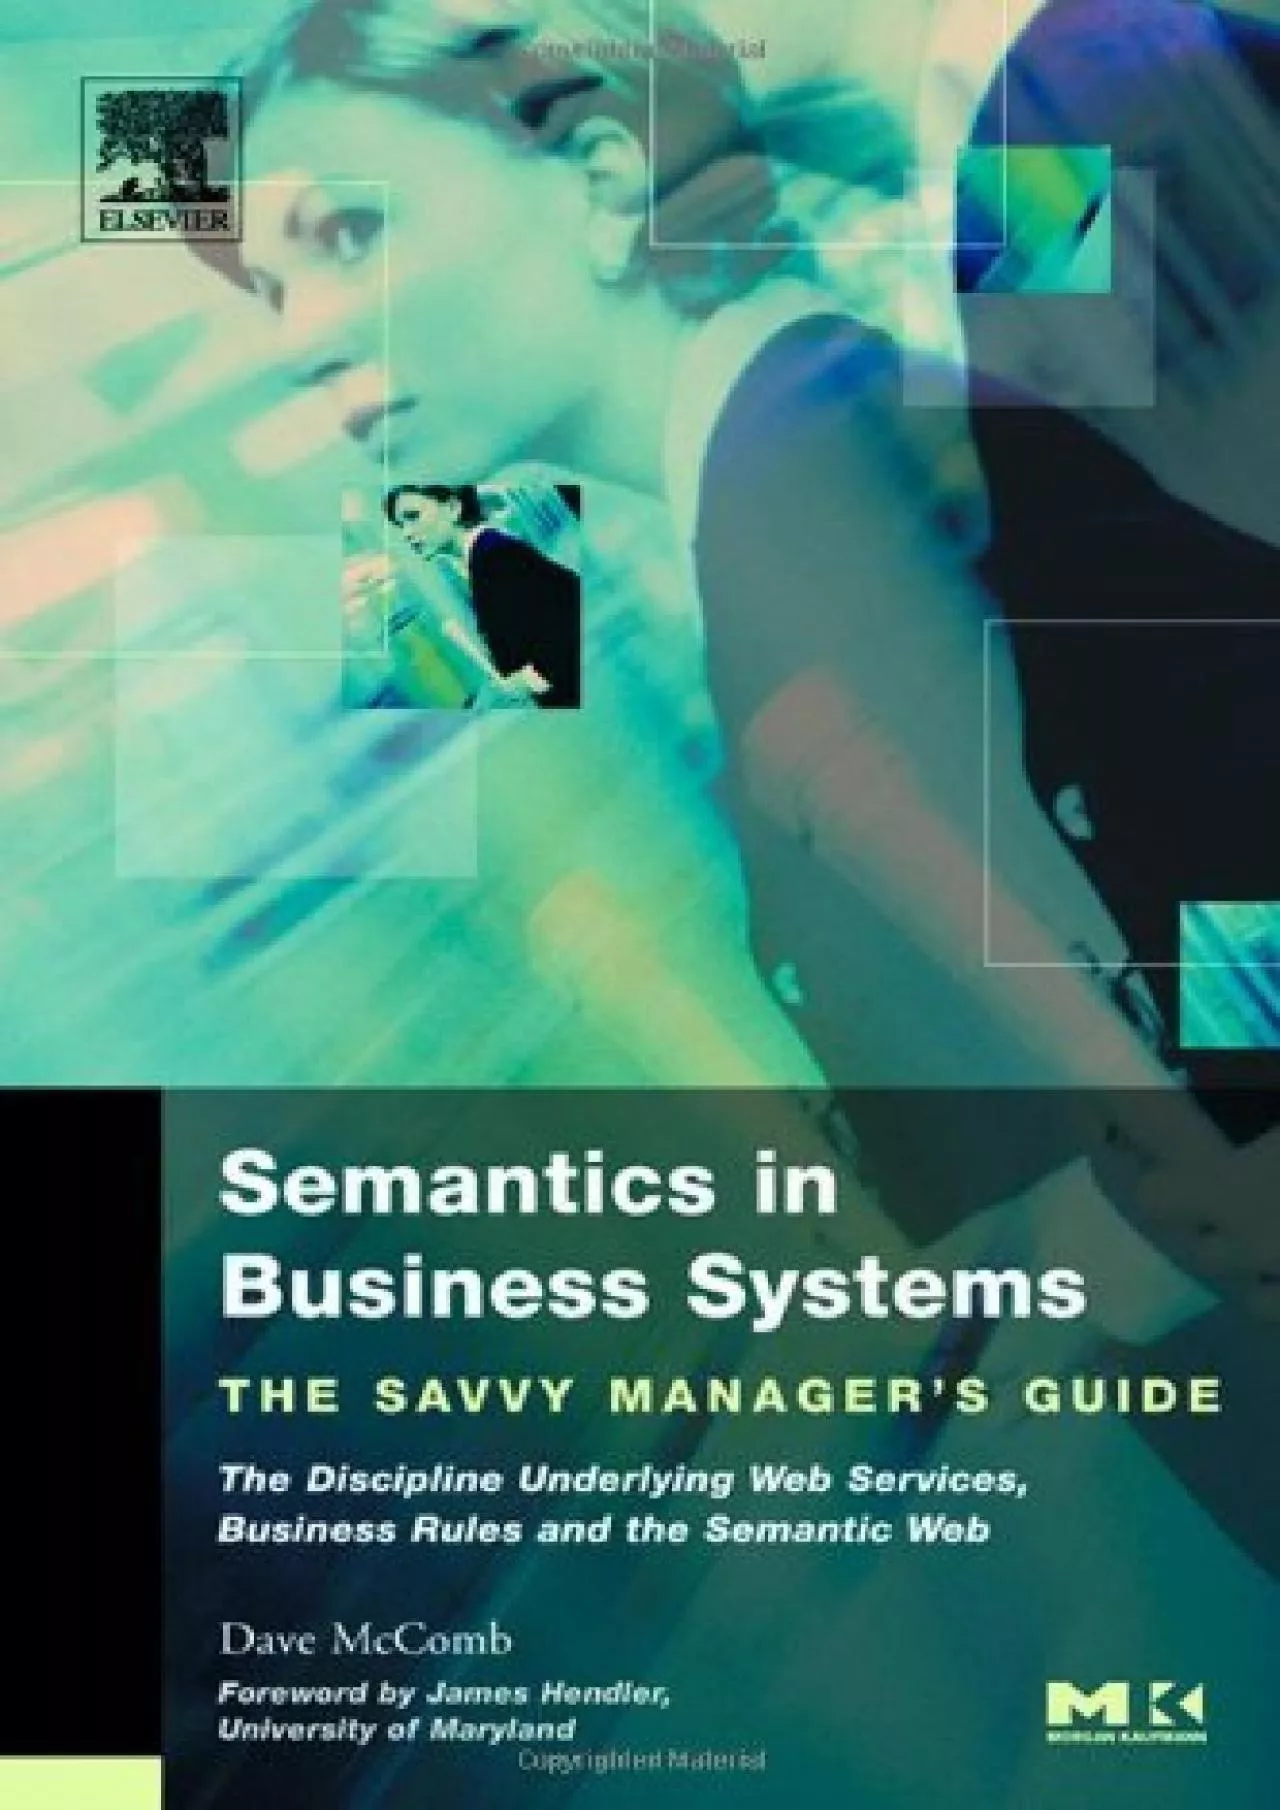 (DOWNLOAD)-Semantics in Business Systems: The Savvy Manager\'s Guide (The Savvy Manager\'s